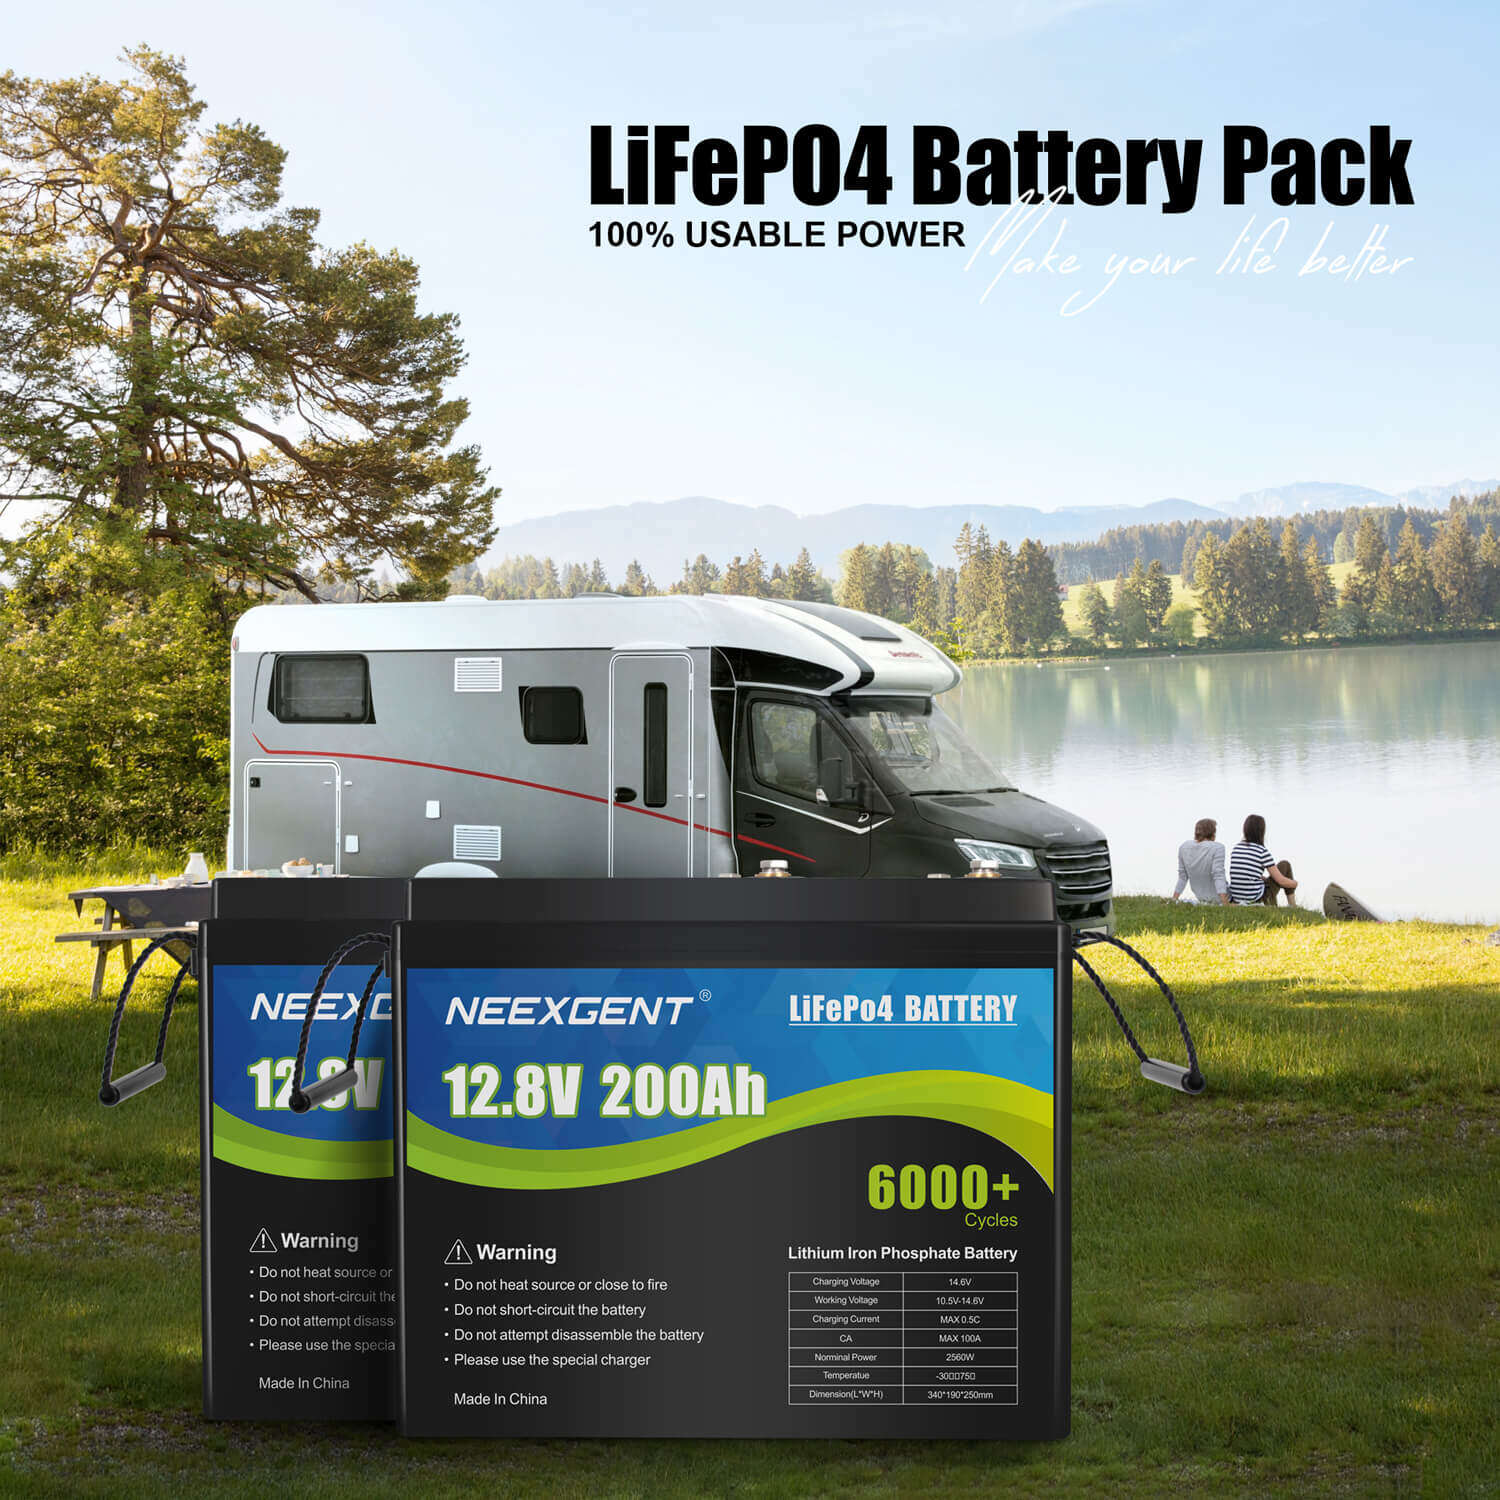 Rechargeable LiFePO4 Battery pack